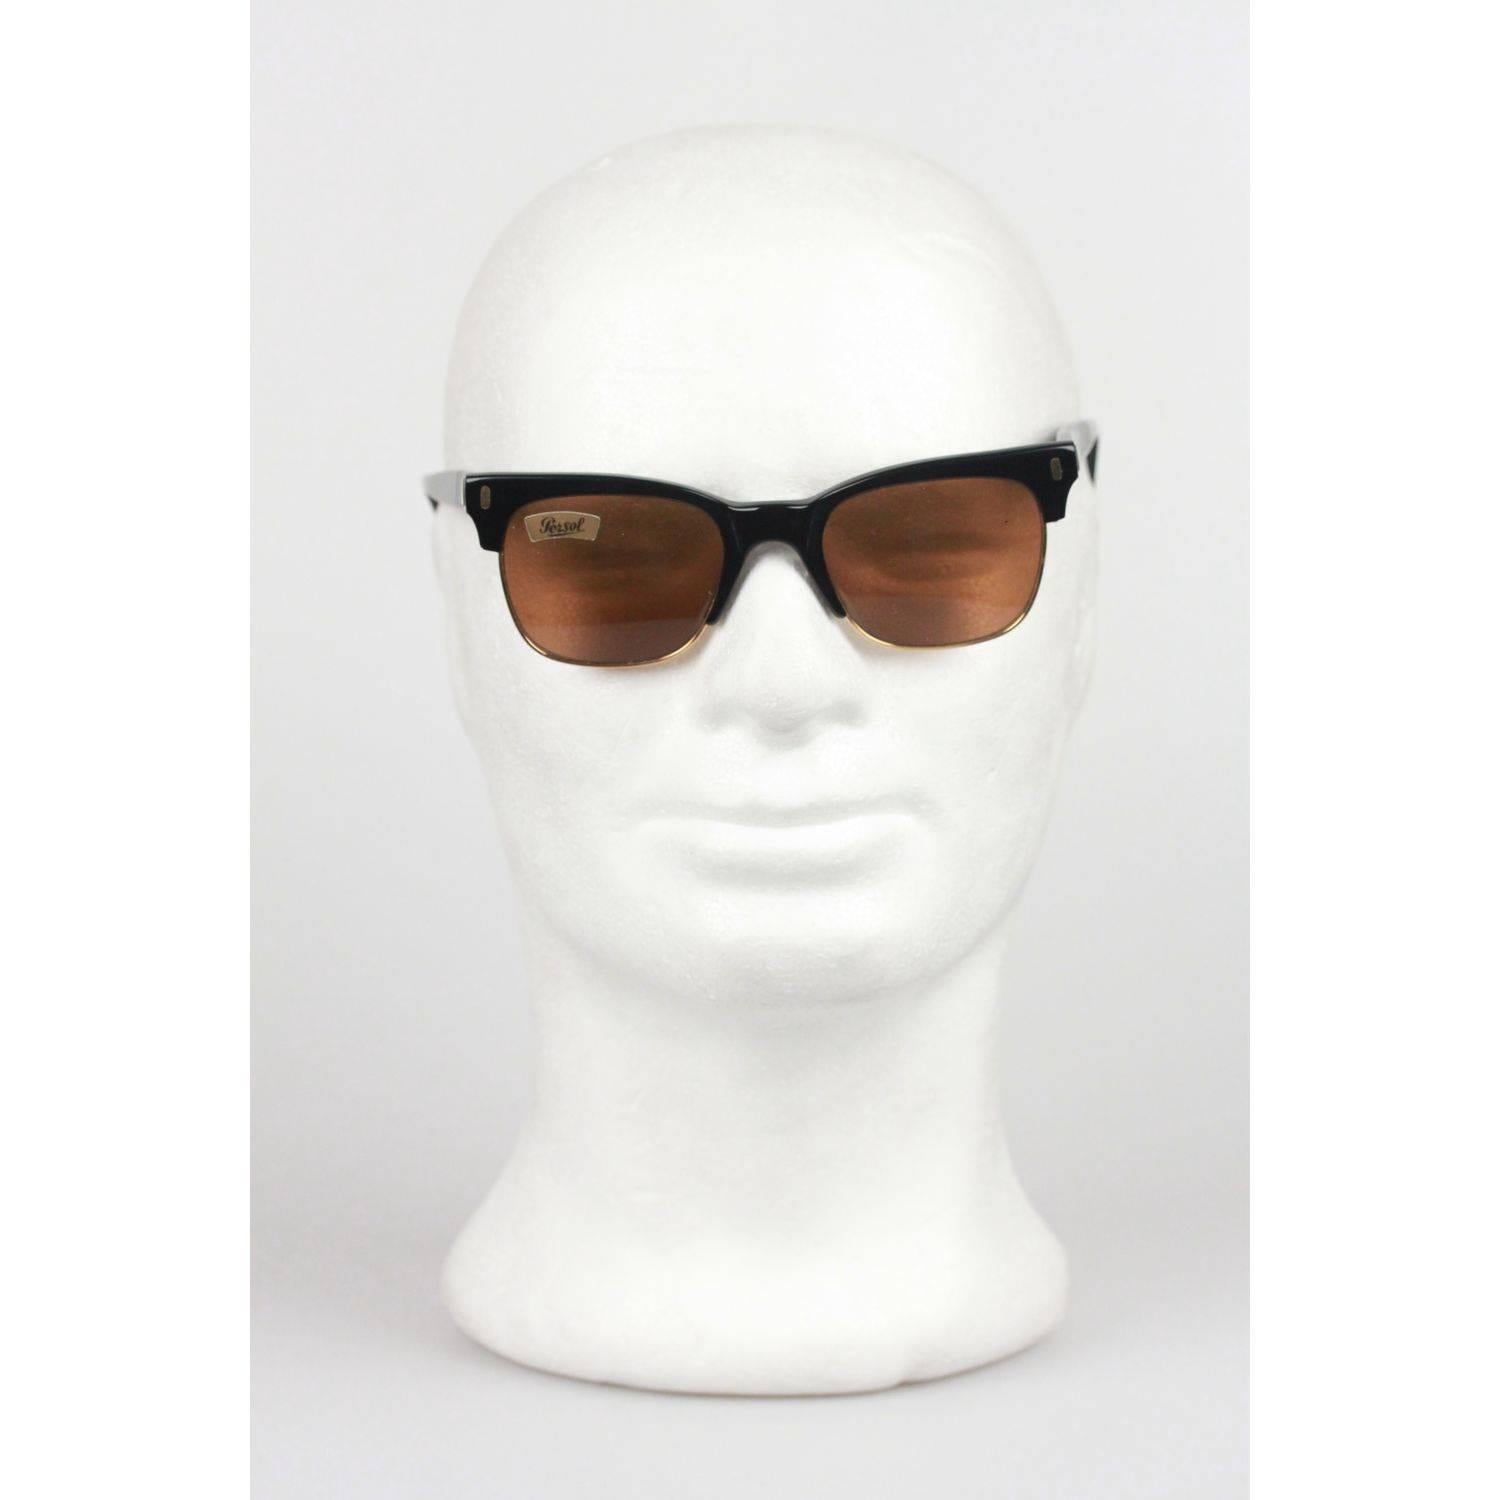 - Unisex designer shades by Persol Ratti , mod. 9231, from Italy
- Period/Era: 1980s NOS
- Model: 9231-50 - 147 - 52 - Made in Italy
- Brown tortoise frame 
- Original 100% UV protection brown lenses (PERSOL logo on both lenses)
- Flexible temple